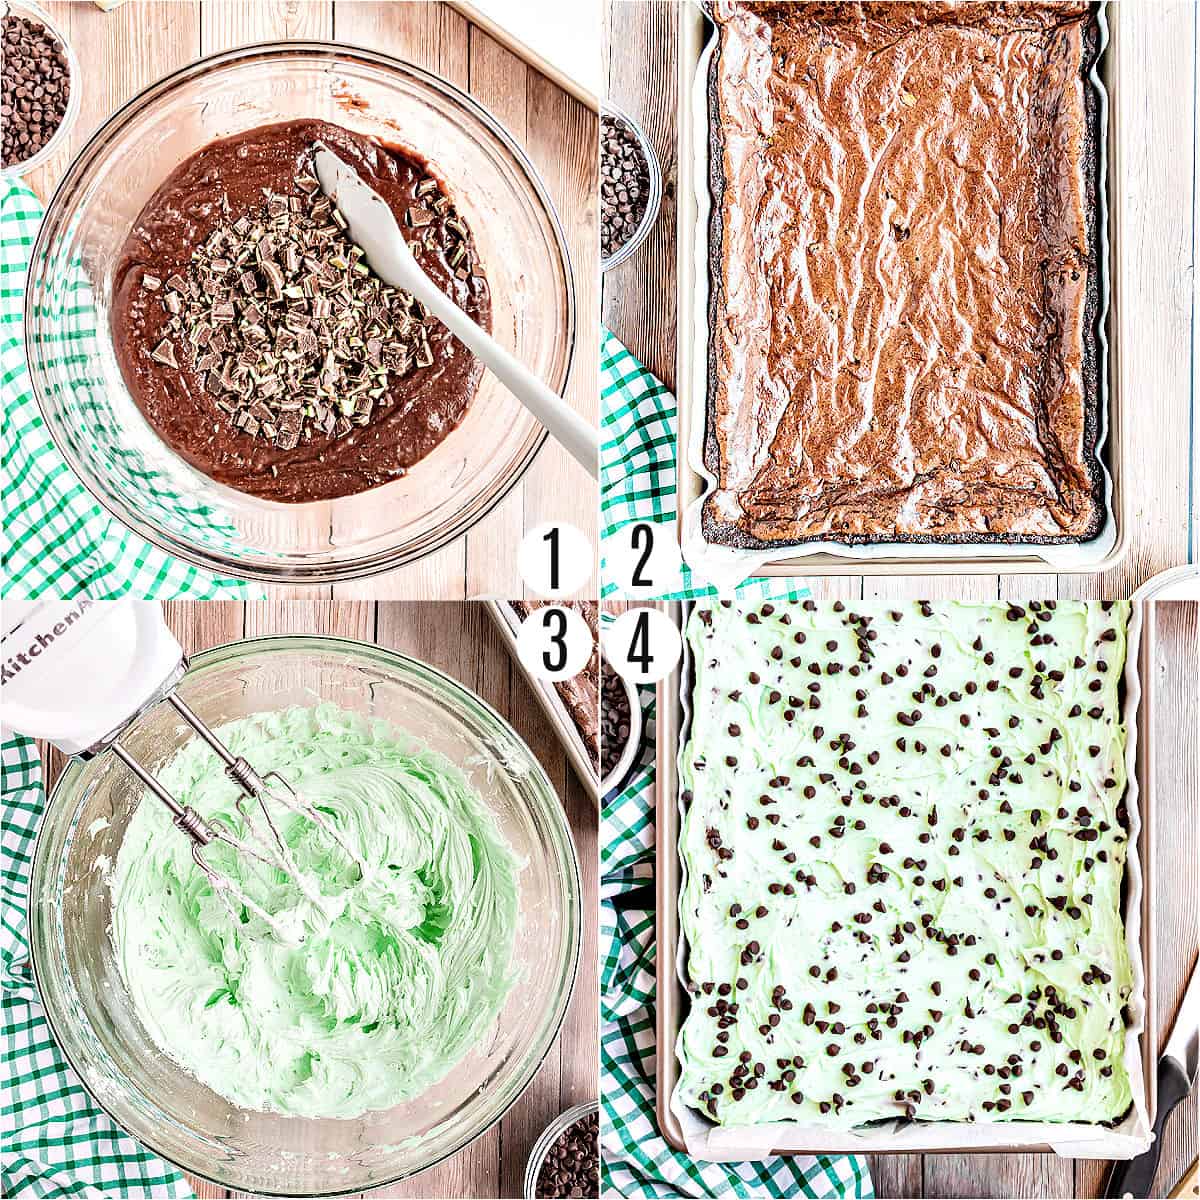 Step by step photos showing how to make mint chocolate chip brownies.